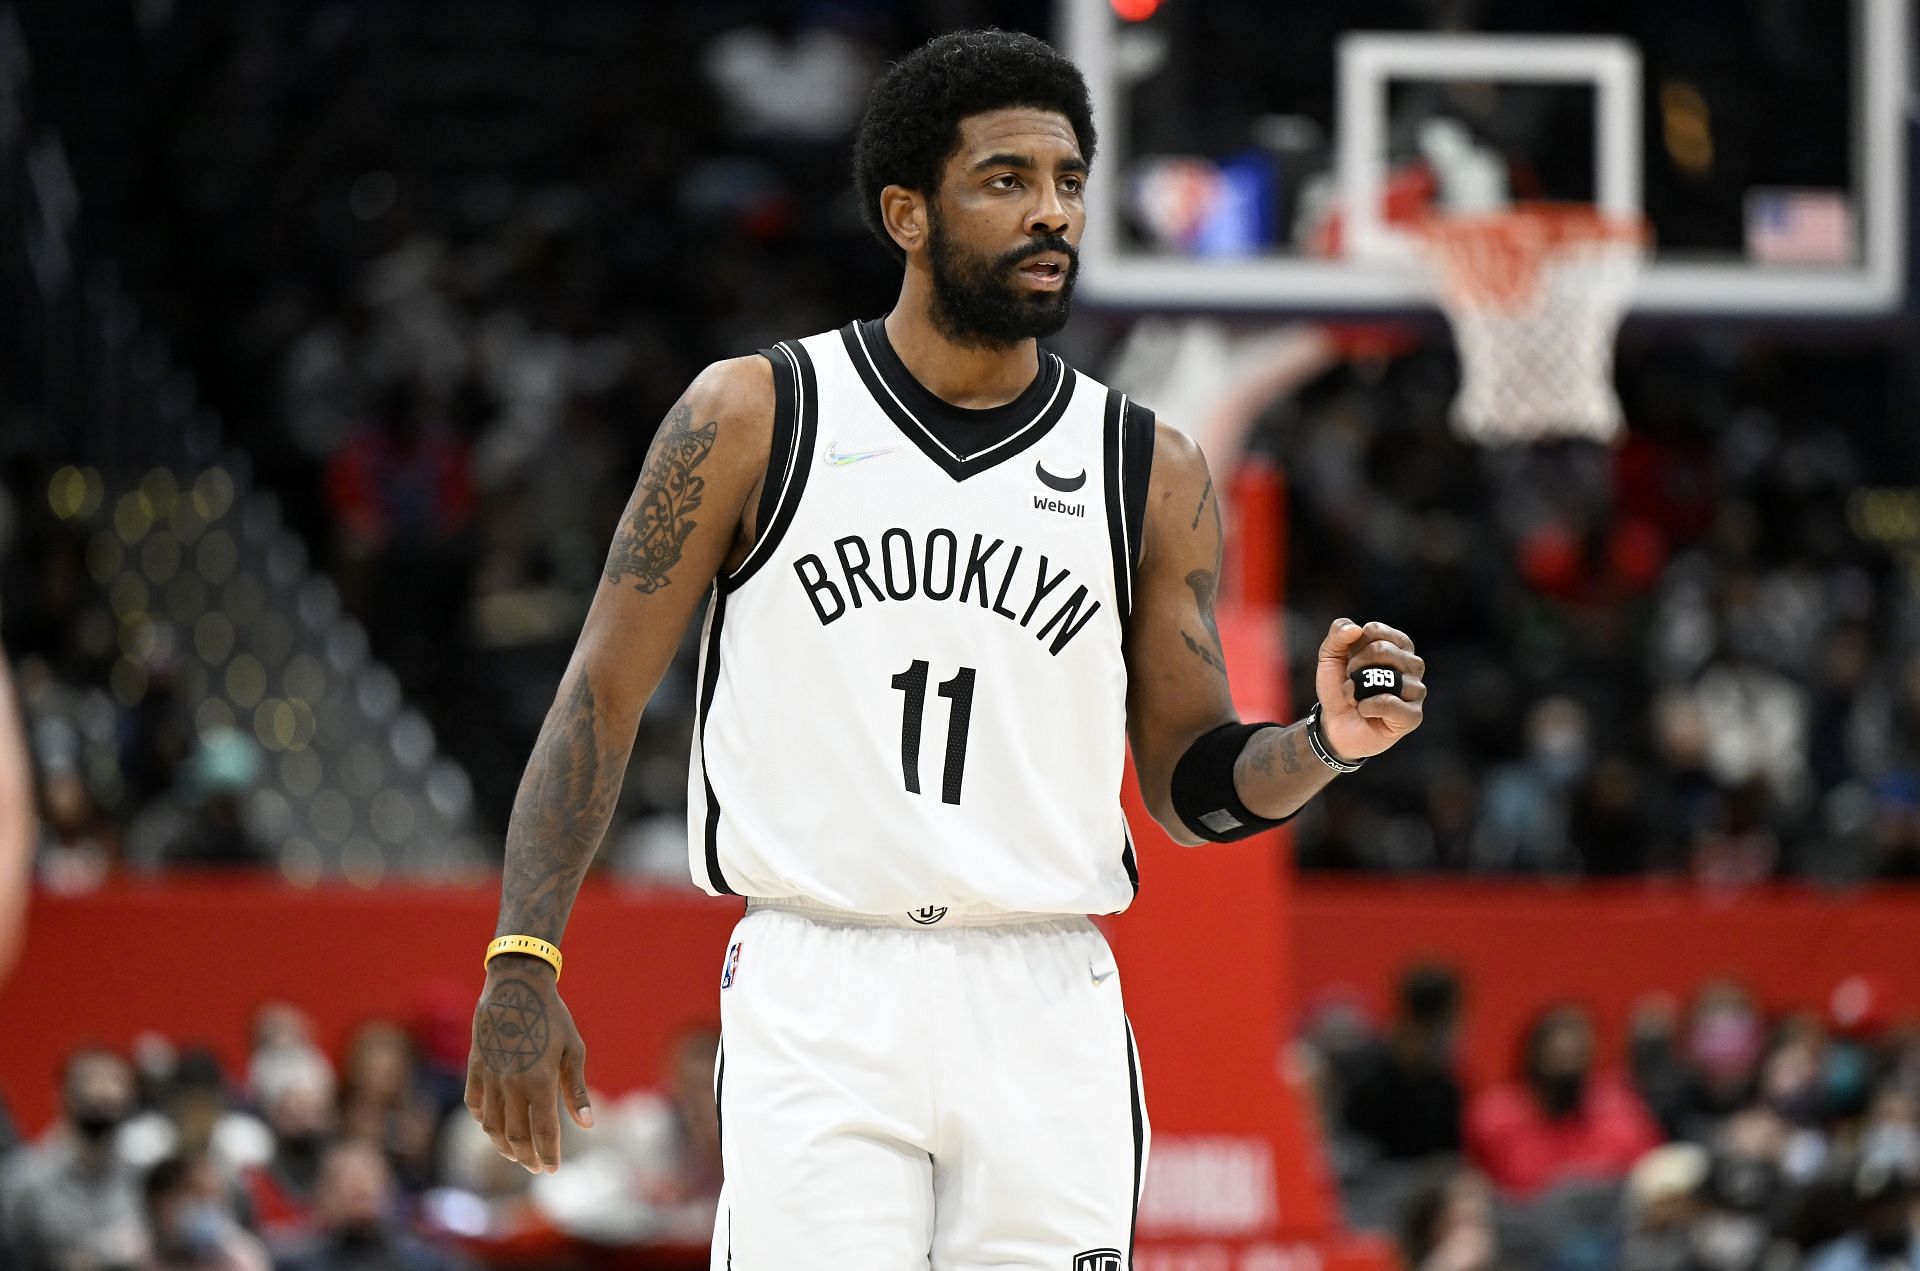 Enter caption Enter caption Enter caption Brooklyn Nets star Kyrie Irving